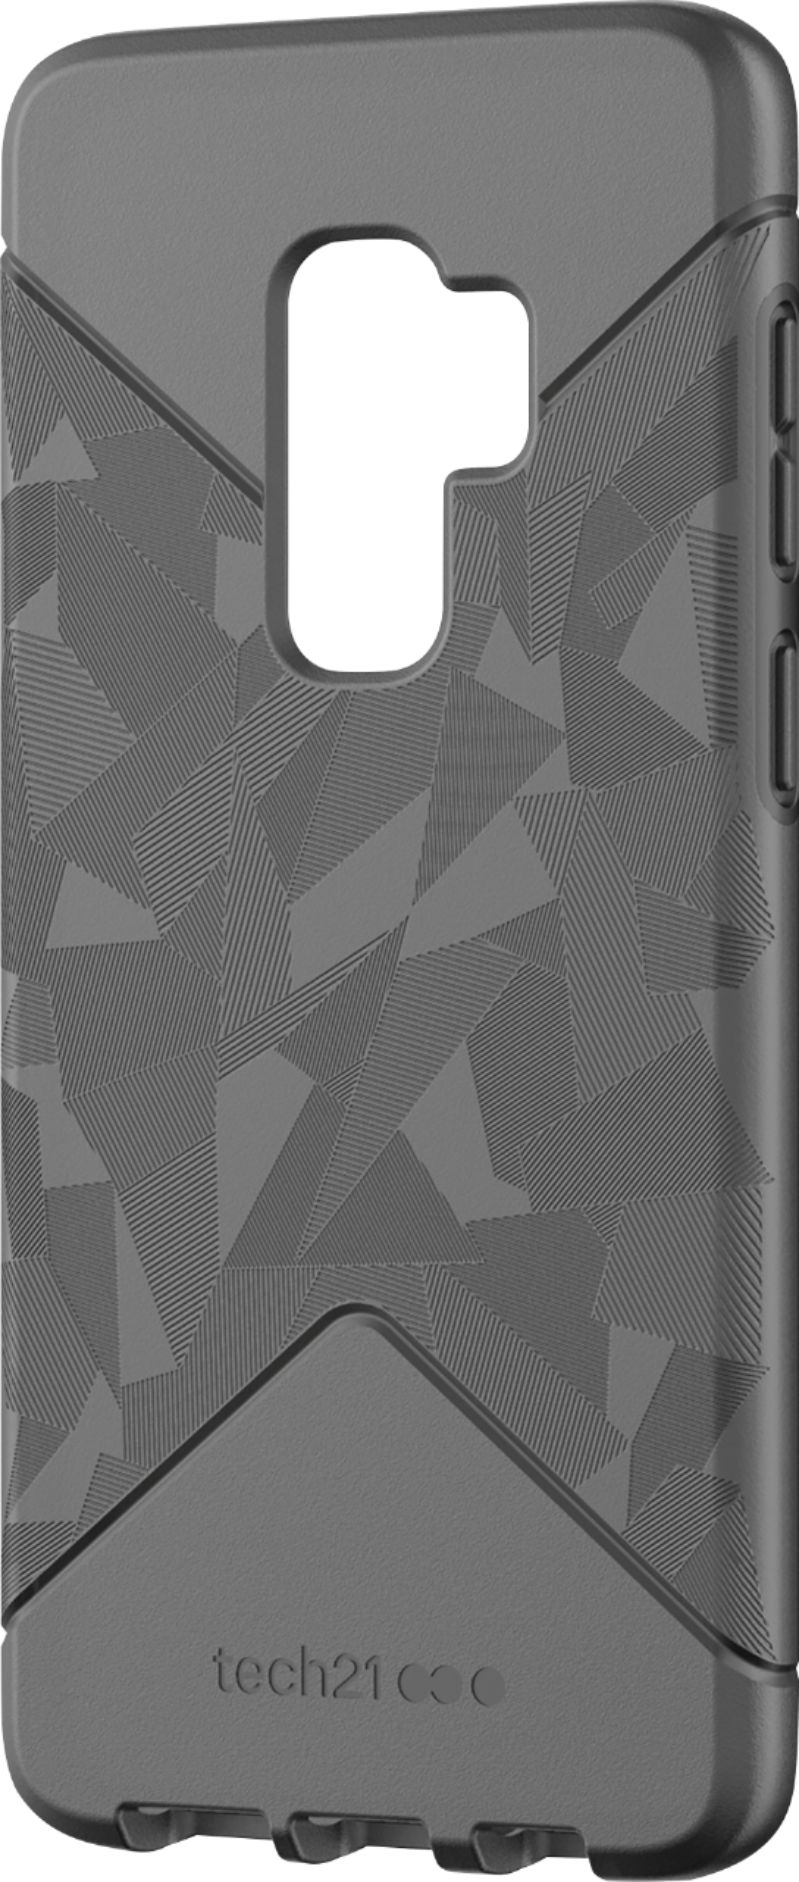 Best Buy: Tech21 Evo Tactical Case for Samsung Galaxy S9+ Black 